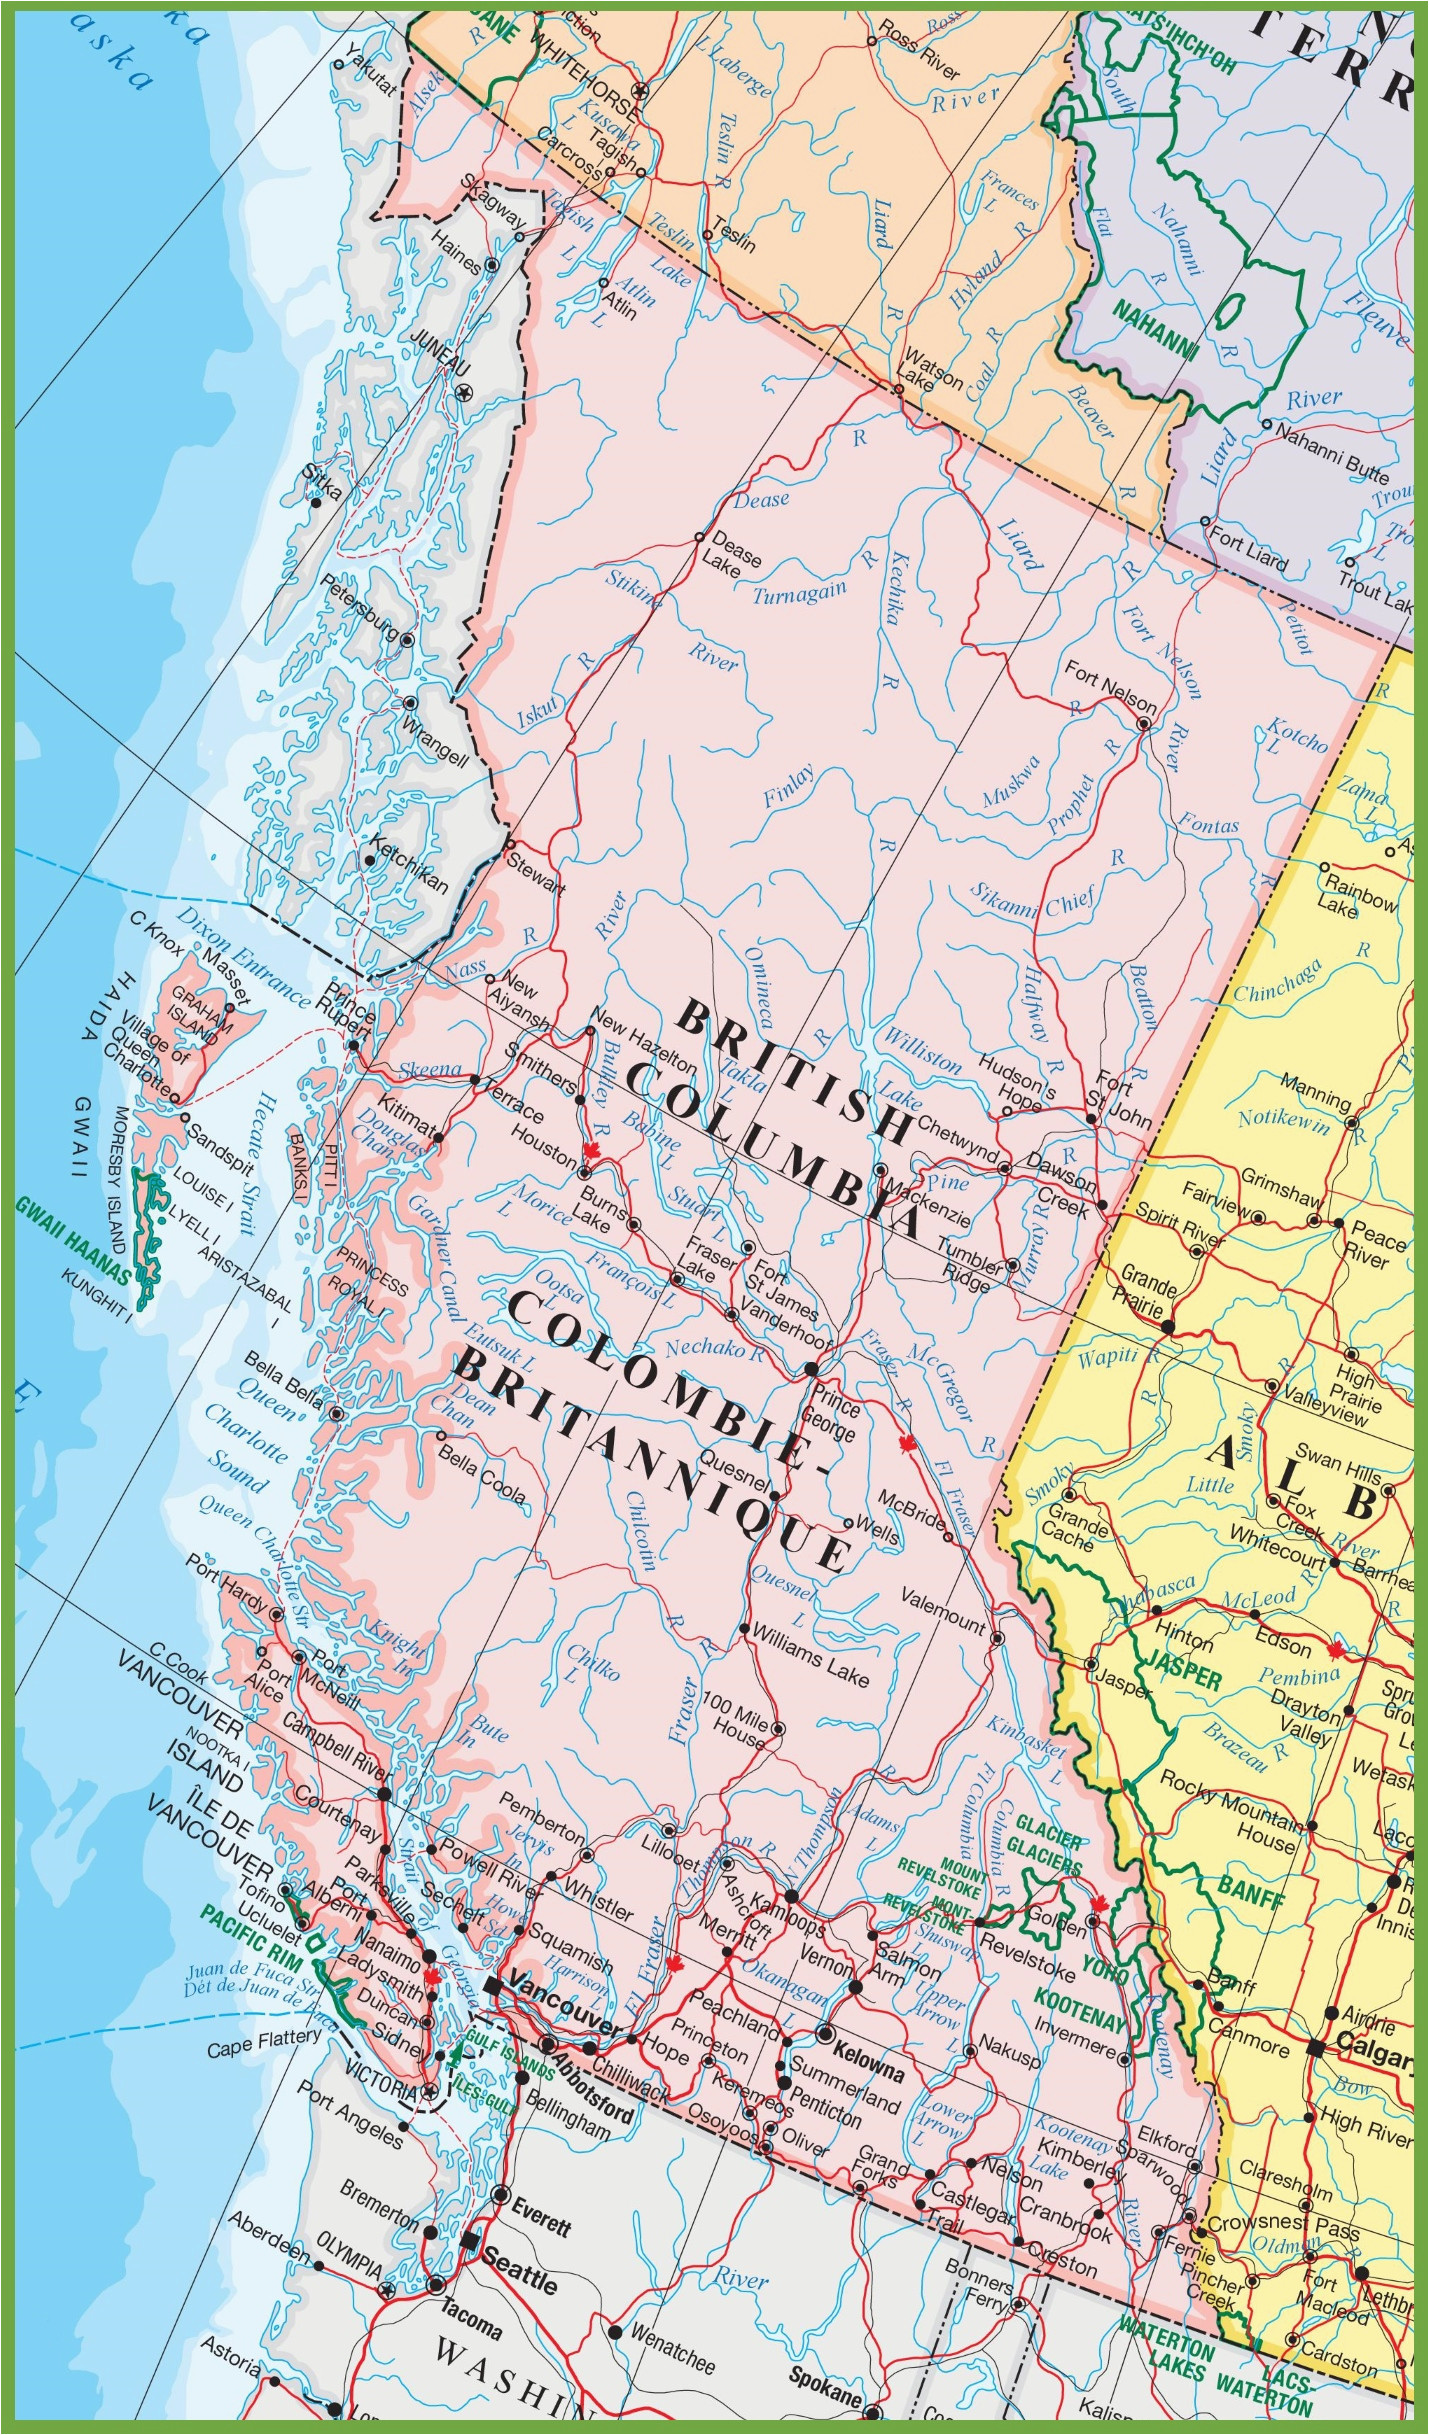 Detailed Map Of British Columbia Canada Large Detailed Map Of British Columbia with Cities and towns